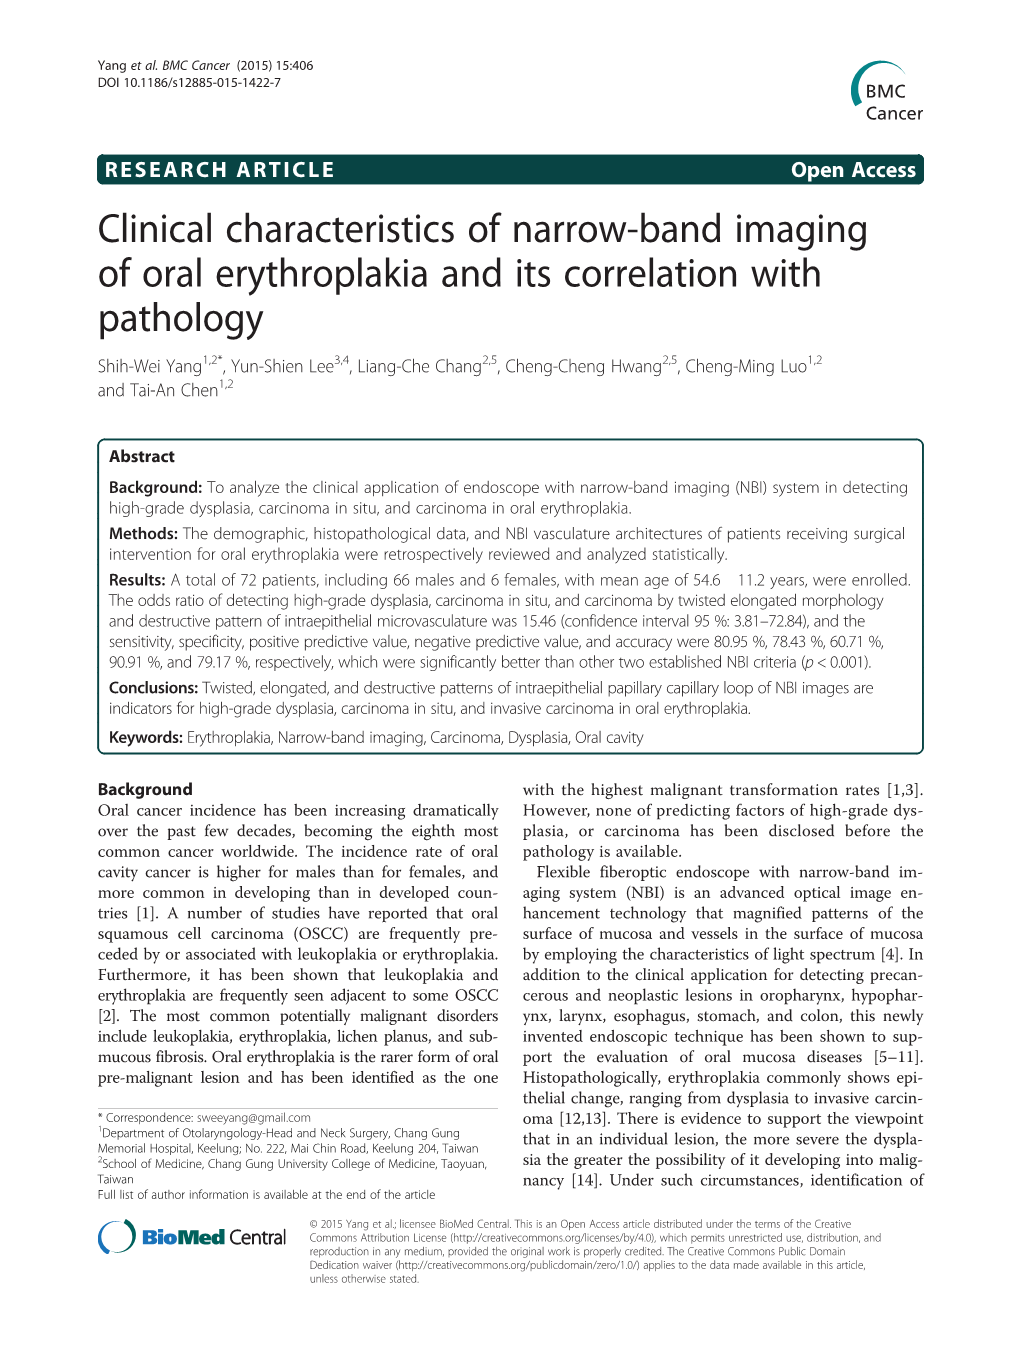 Clinical Characteristics of Narrow-Band Imaging of Oral